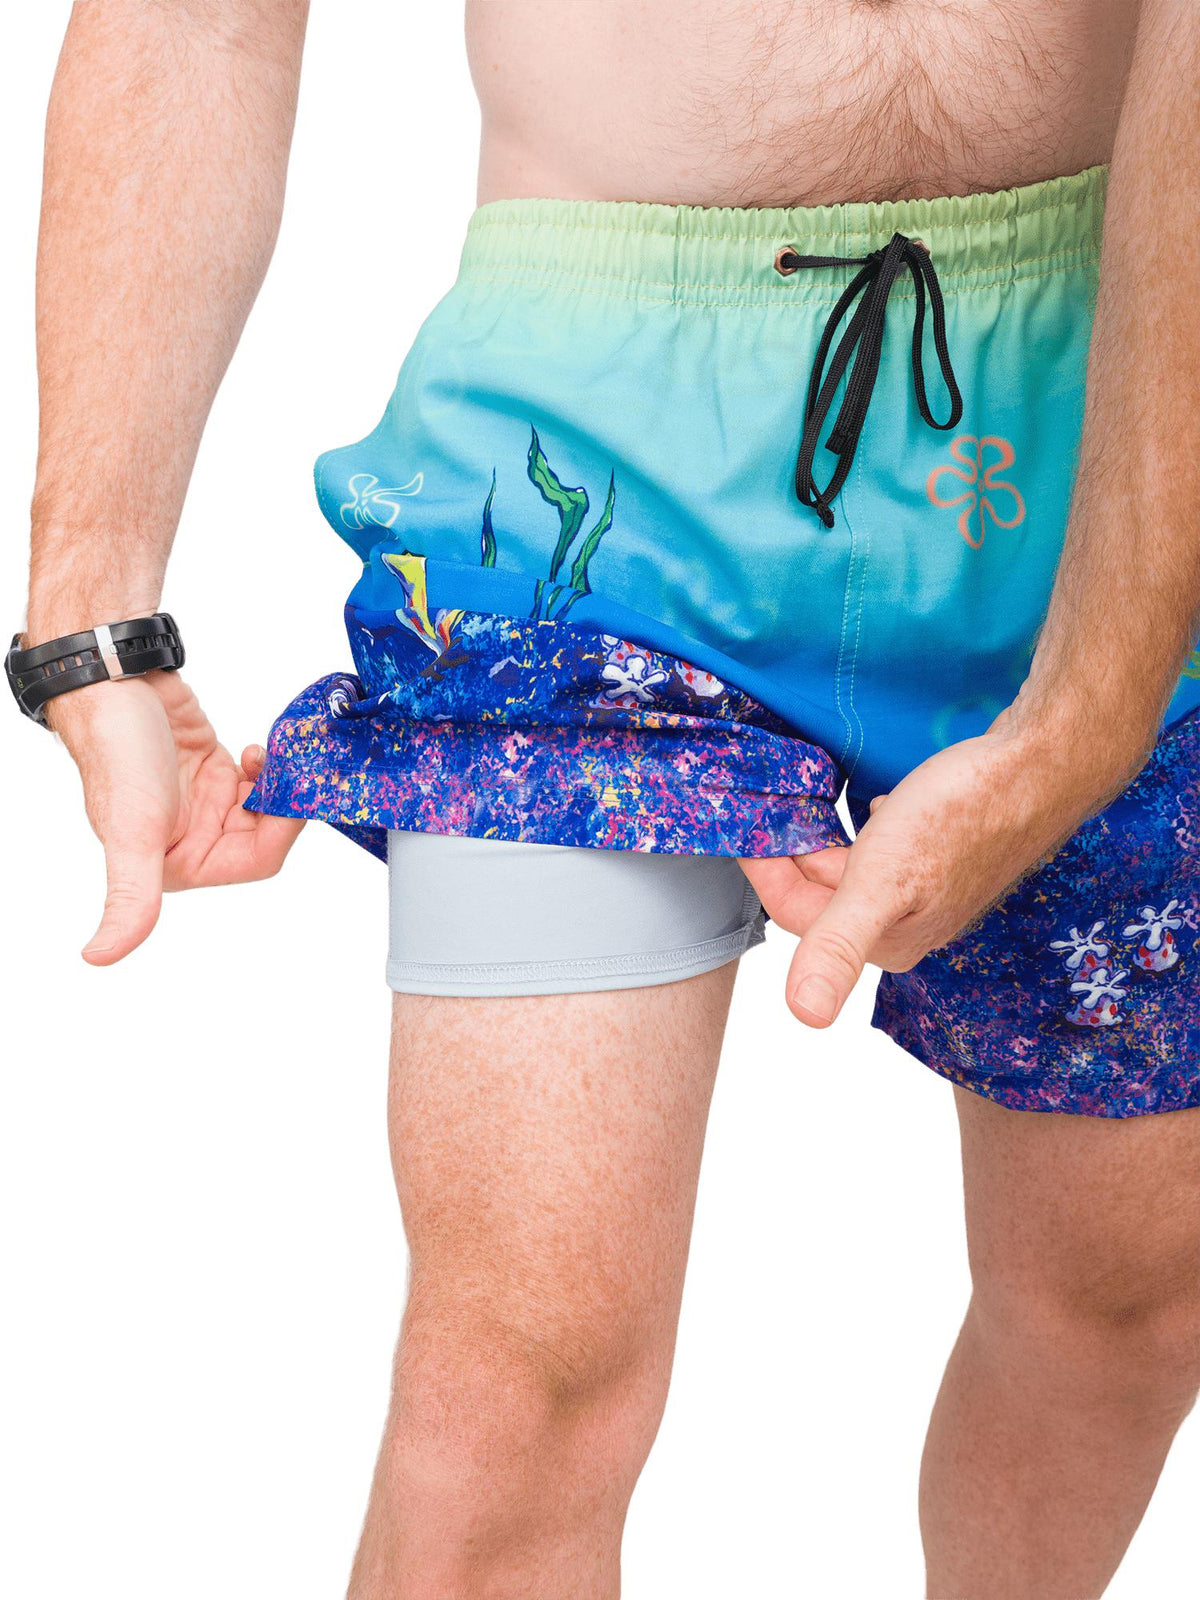 Model: The shorts have a comfortable, lightweight and stretchy liner.